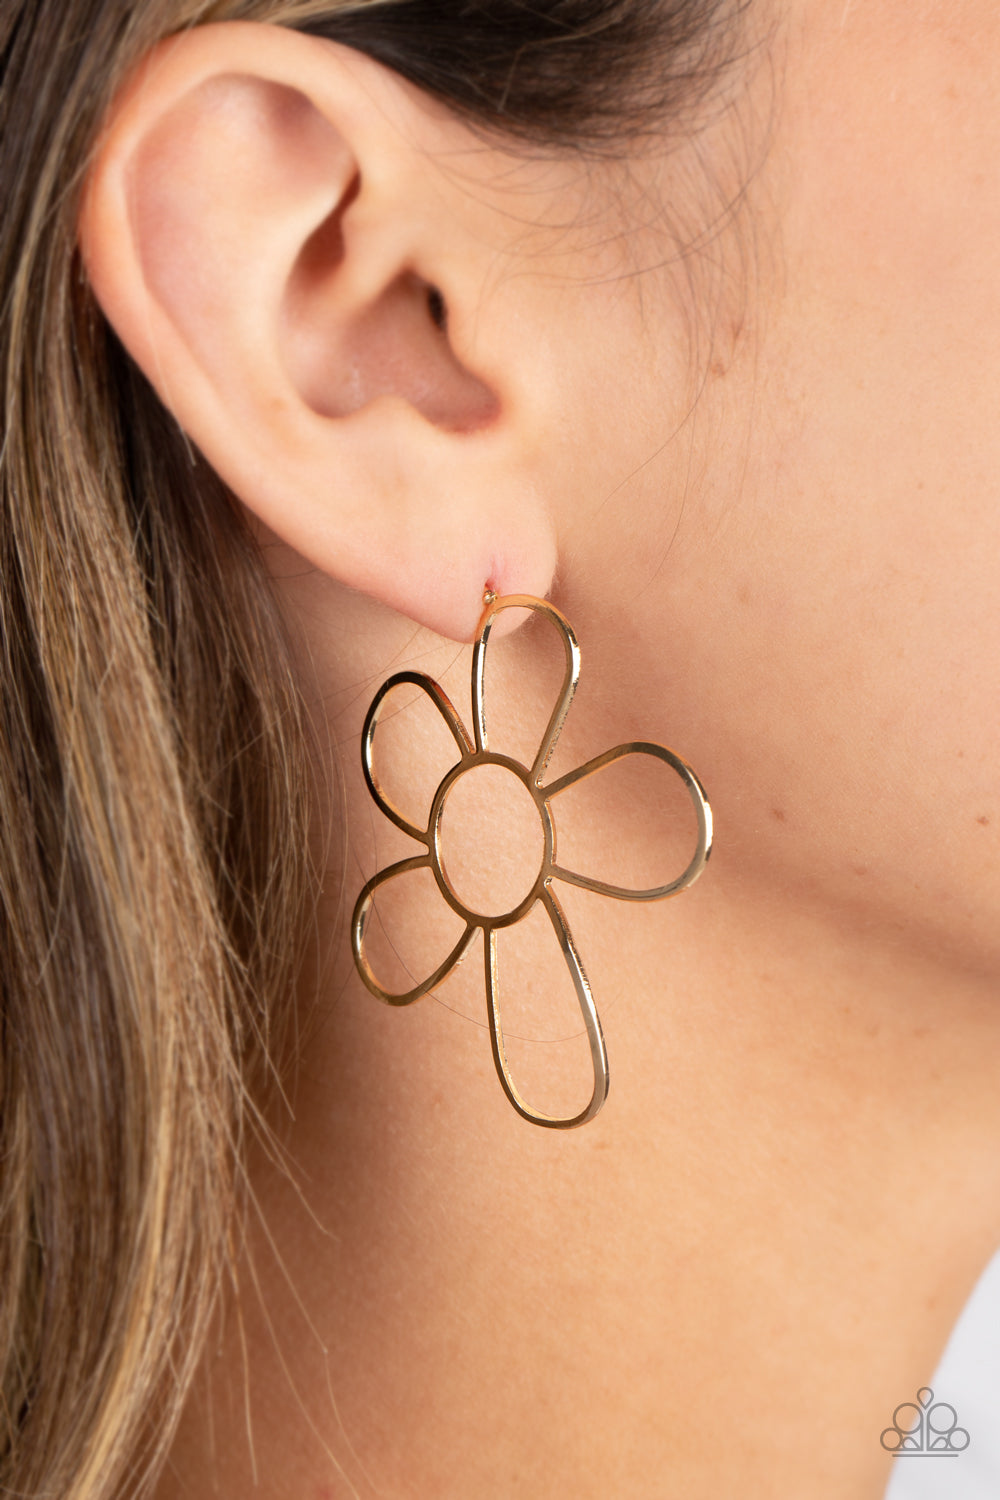 Shimmery, high-sheen gold is artfully shaped into an oversized flower. The open framework creates an air of whimsicality, as the exaggerated size of the design leaves a lasting impression. Earring attaches to a standard post fitting.  Sold as one pair of post earrings.